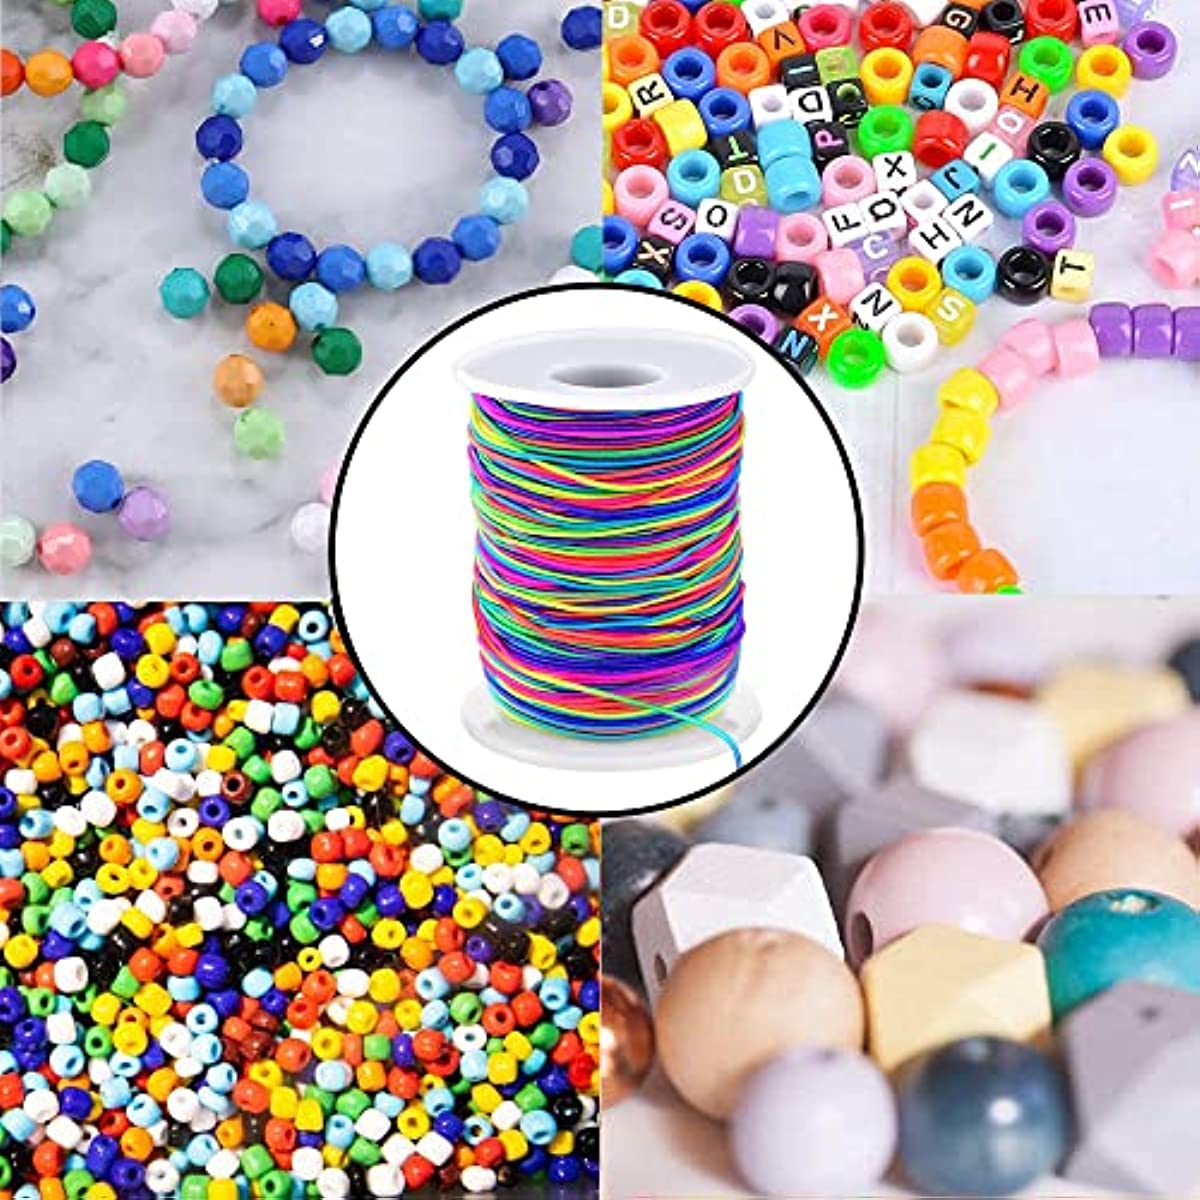 1pc Non-elastic Rainbow Beading Cord, Colorful Crafting Thread String Cord  For Jewelry Making Bracelet Necklace DIY Craft Bead String Beading Crafting  Cords